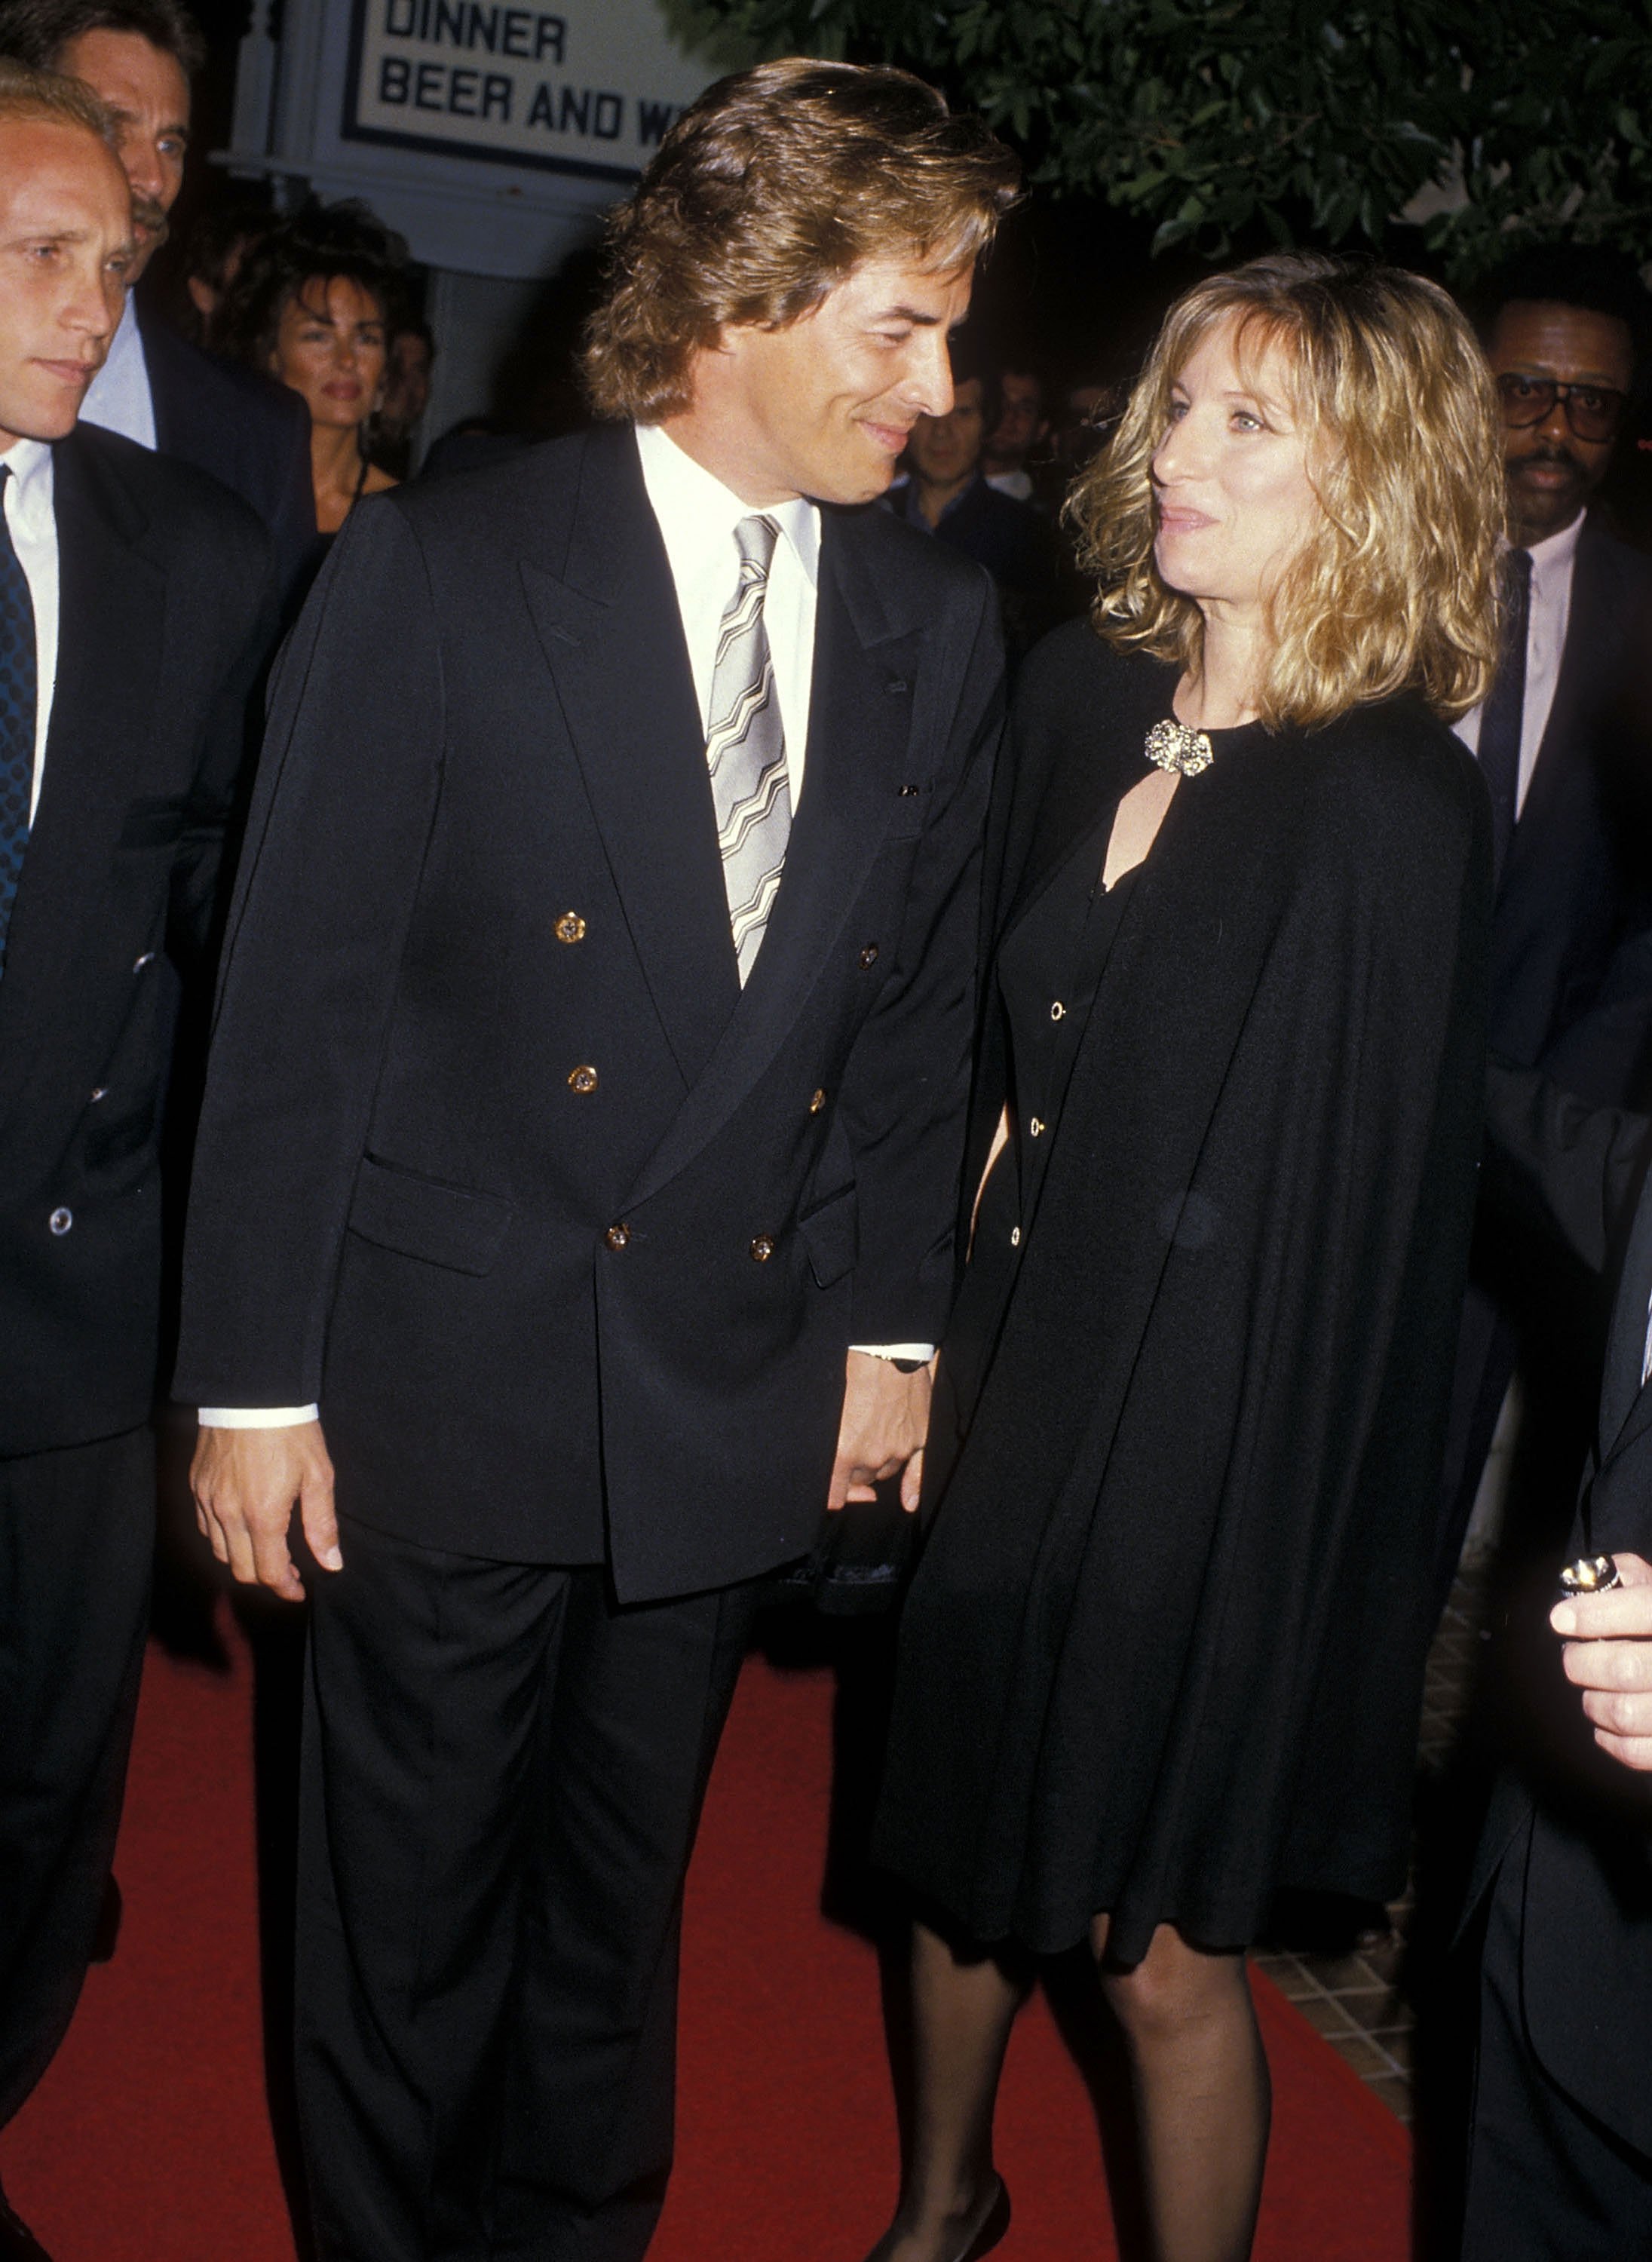 Actor Don Johnson and Barbra Streisand attend the "Sweet Hearts Dance" Westwood Premiere at the Avco Centre Cinemas in Westwood on September 18, 1988. | Source: Getty Images